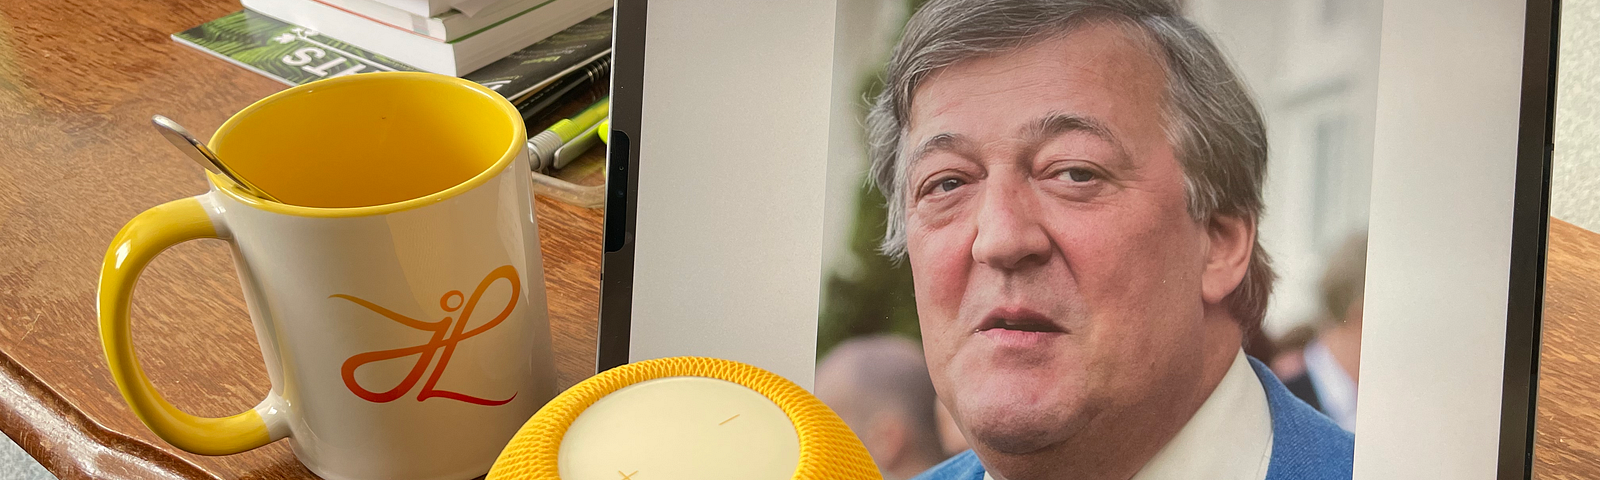 A teacup, Apple’s HomePod mini and a photo of Stephen Fry on a table.